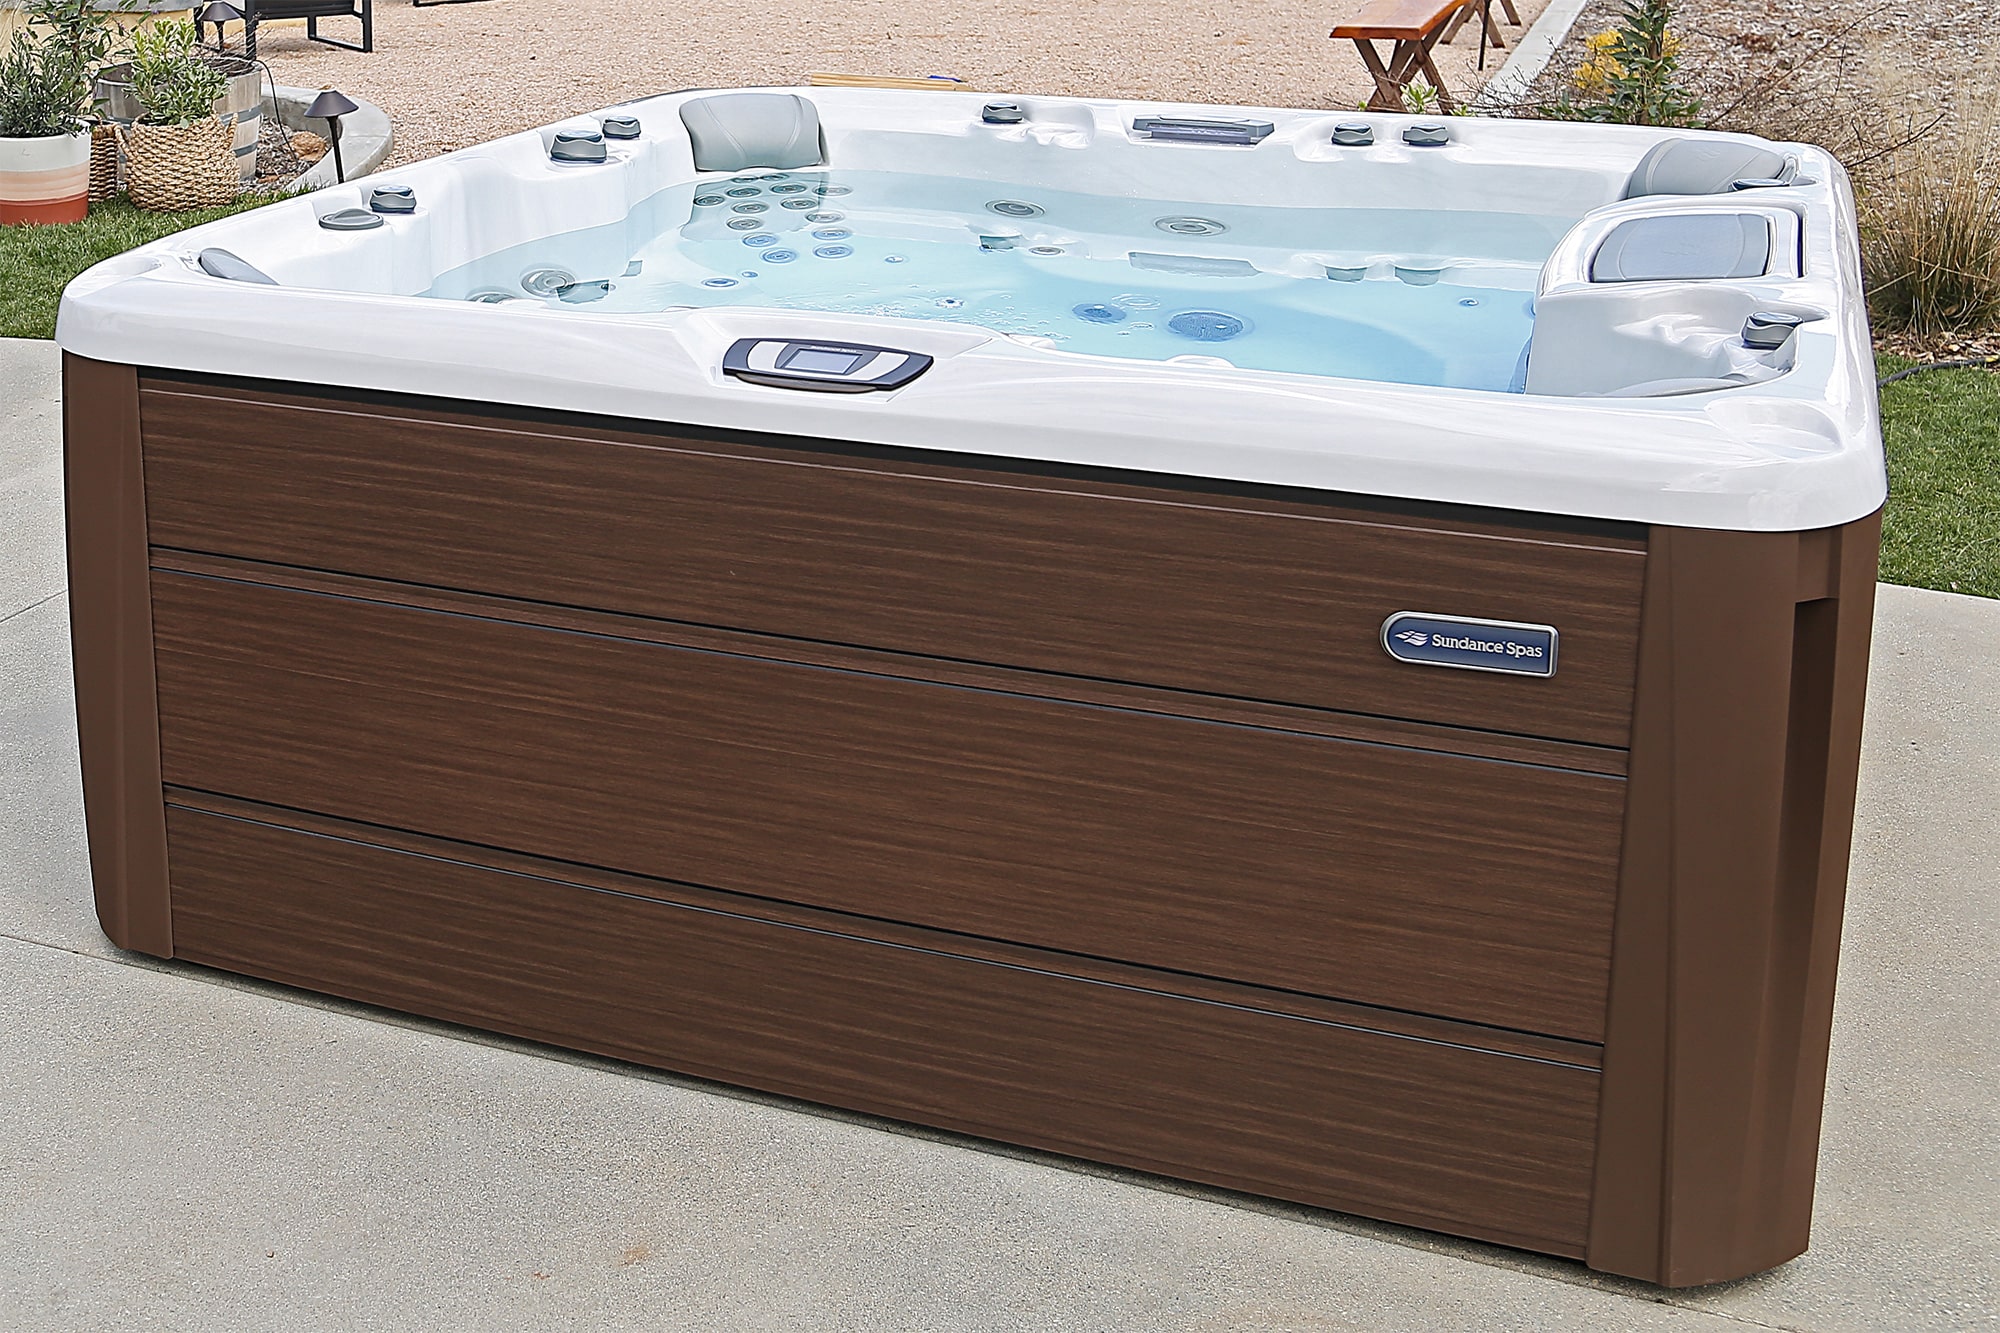 Which Hot Tub Foundation is Best for a Hot Tub?